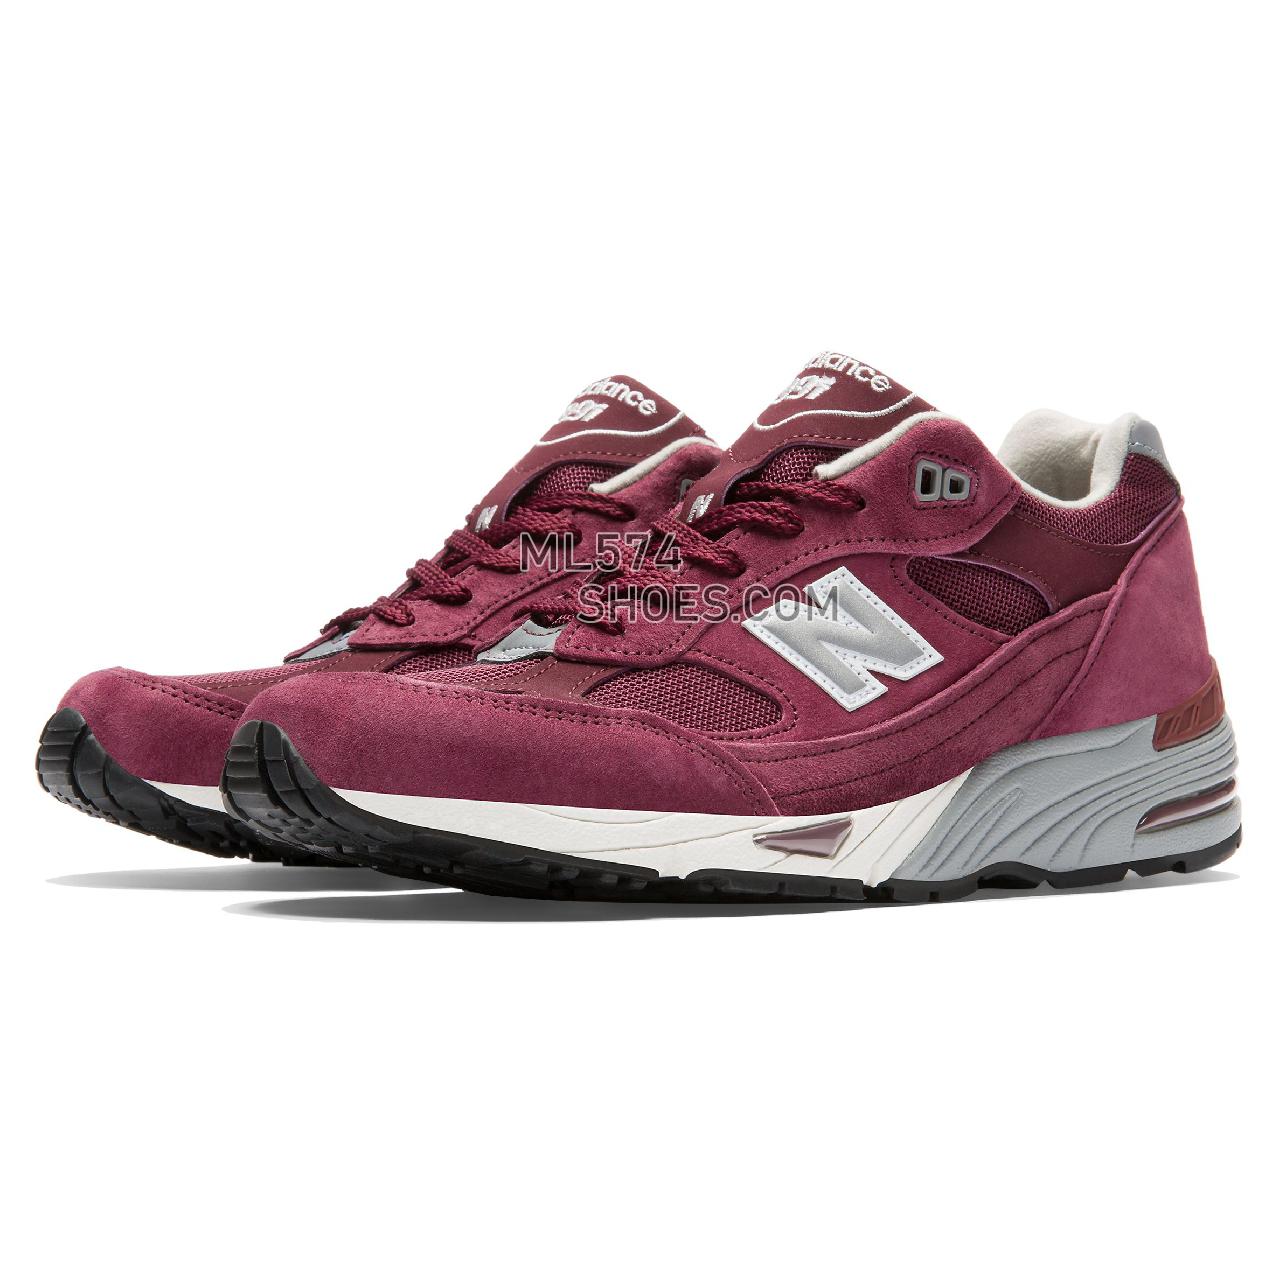 New Balance Made in UK 991 Pigskin - Men's Made in UK 991 Pigskin - Burgundy with Silver - M991EBS